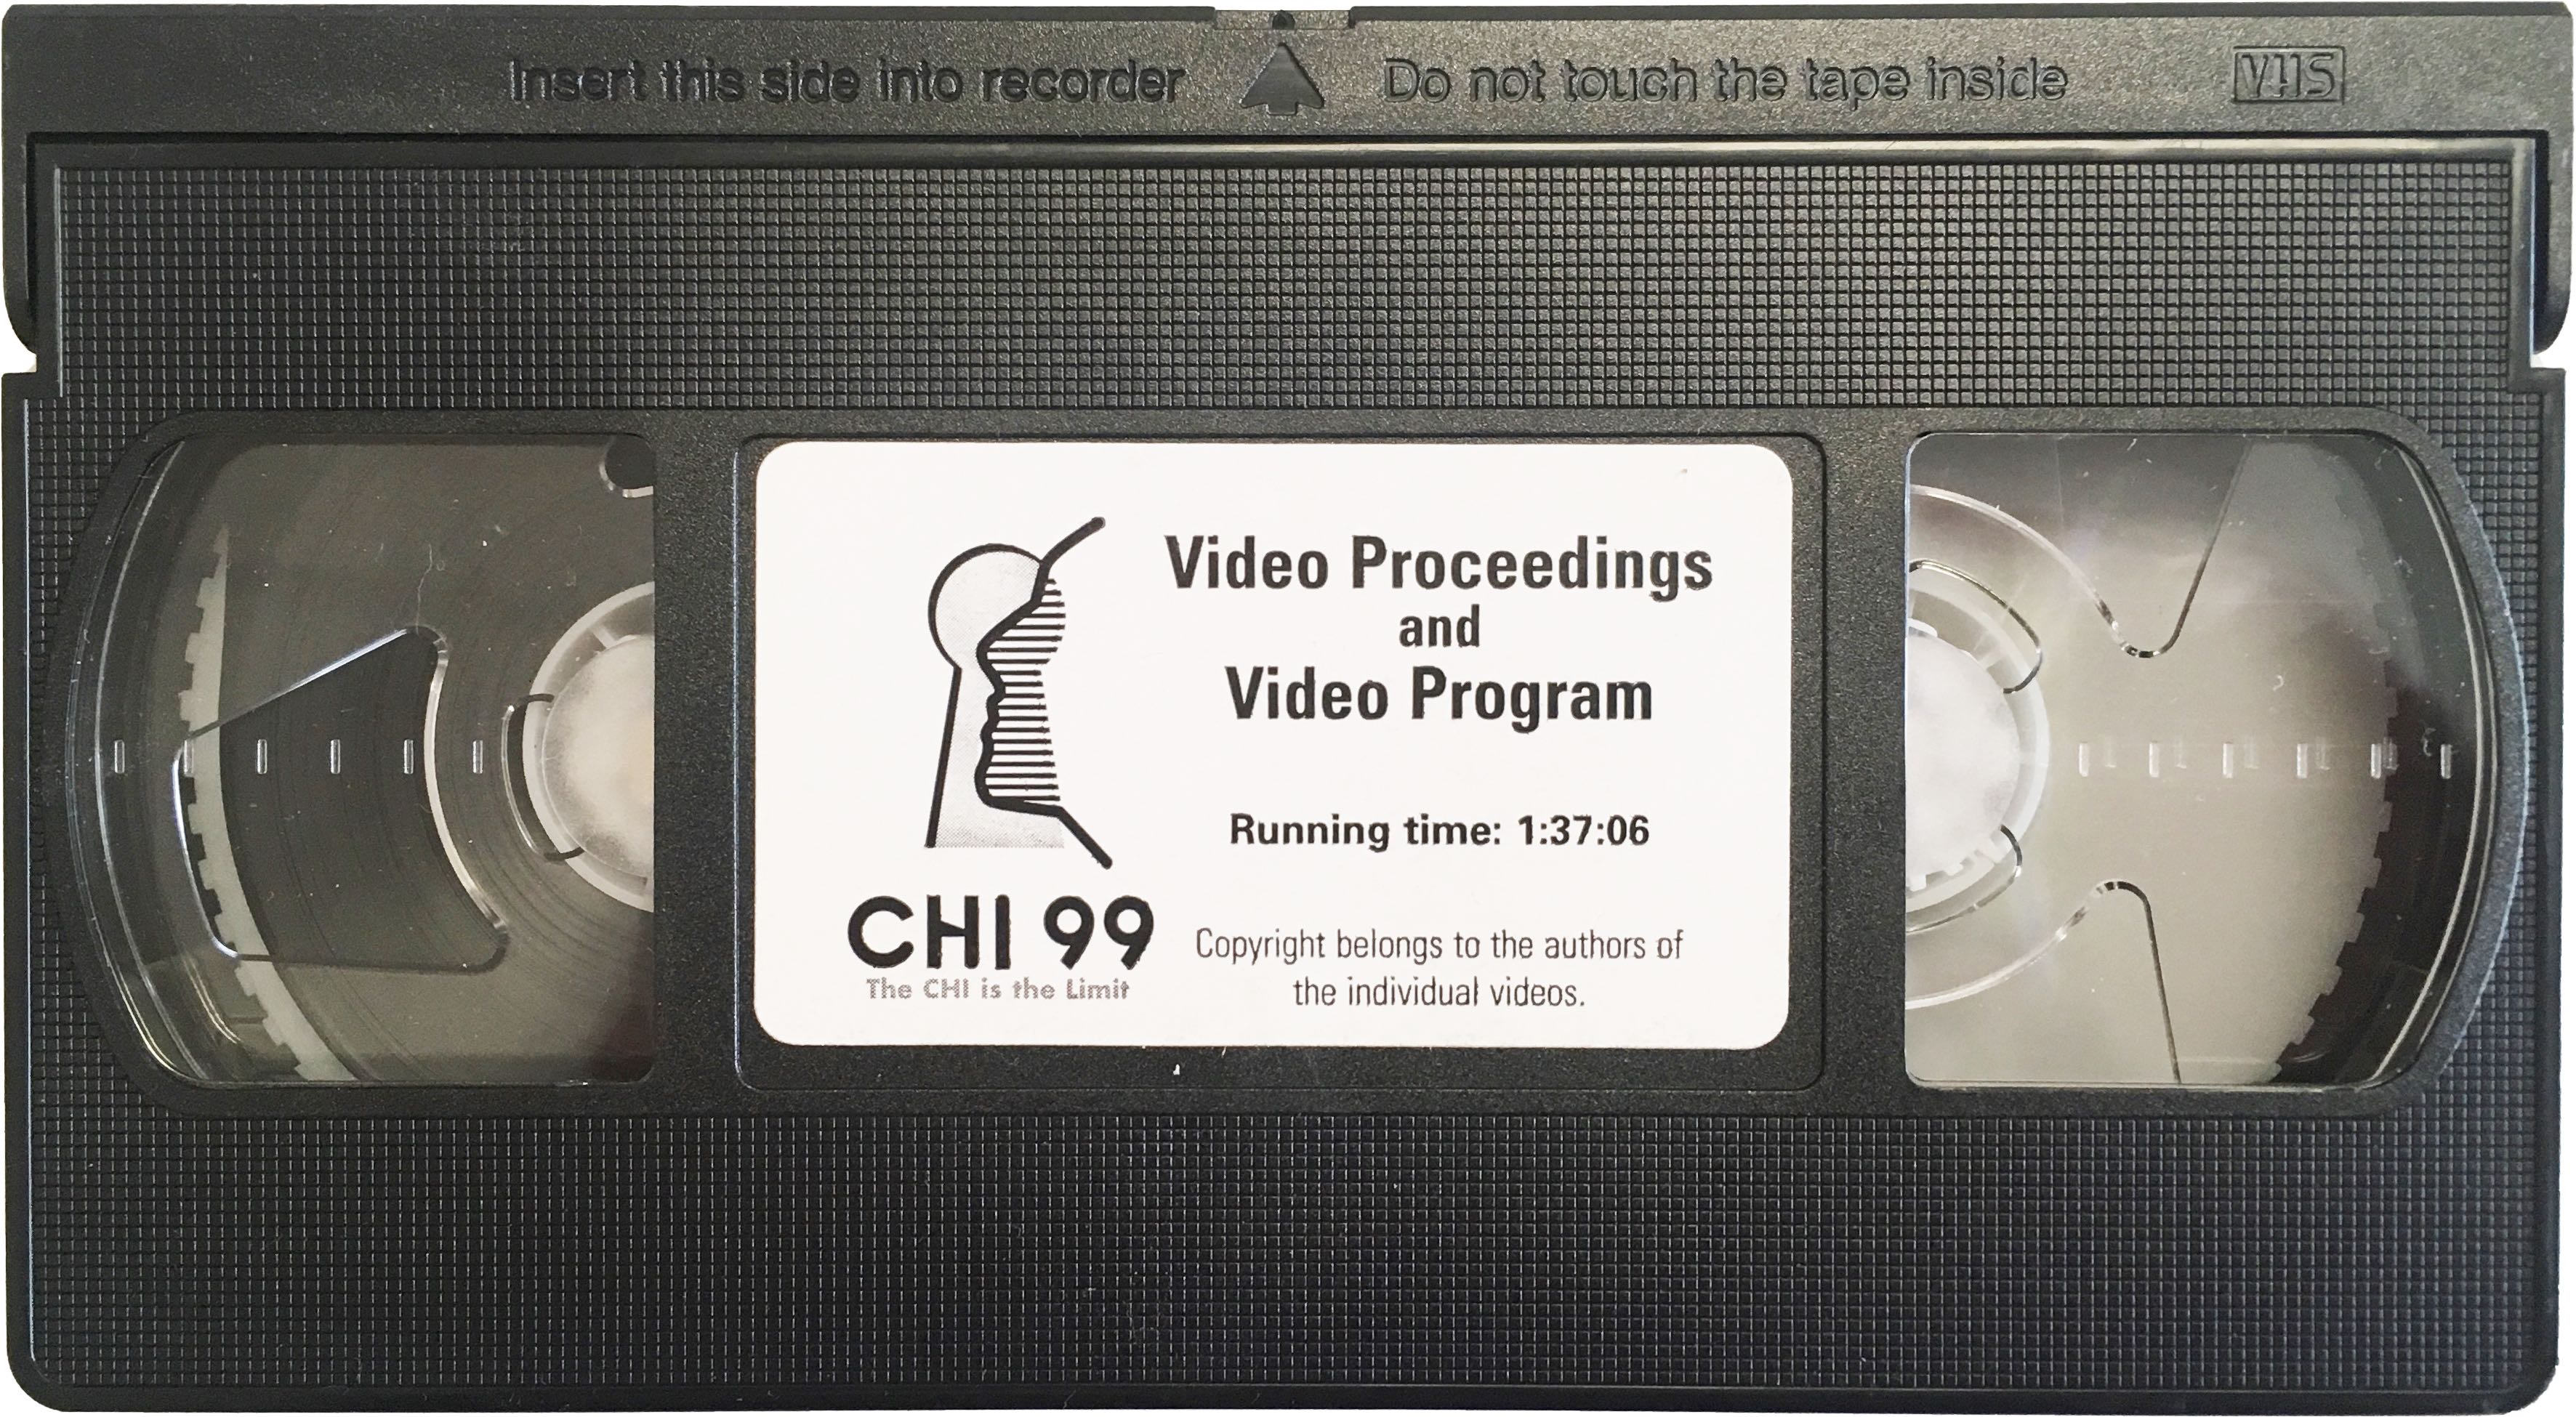 A video tape cassette (analog). This was a norm in 1990's before the advent of digital technology.